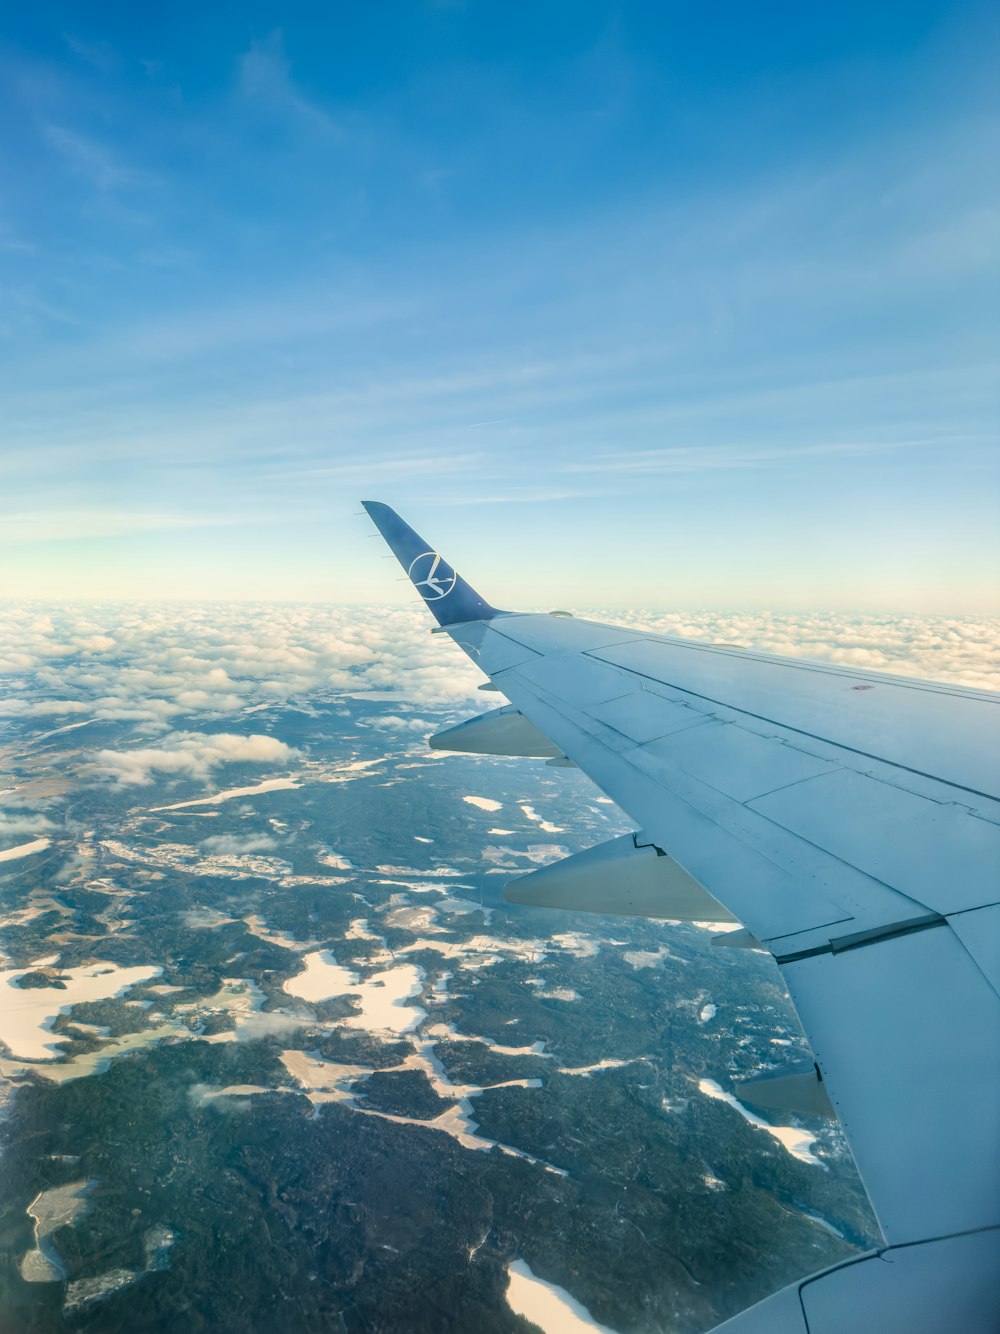 a view of the wing of an airplane flying over the land